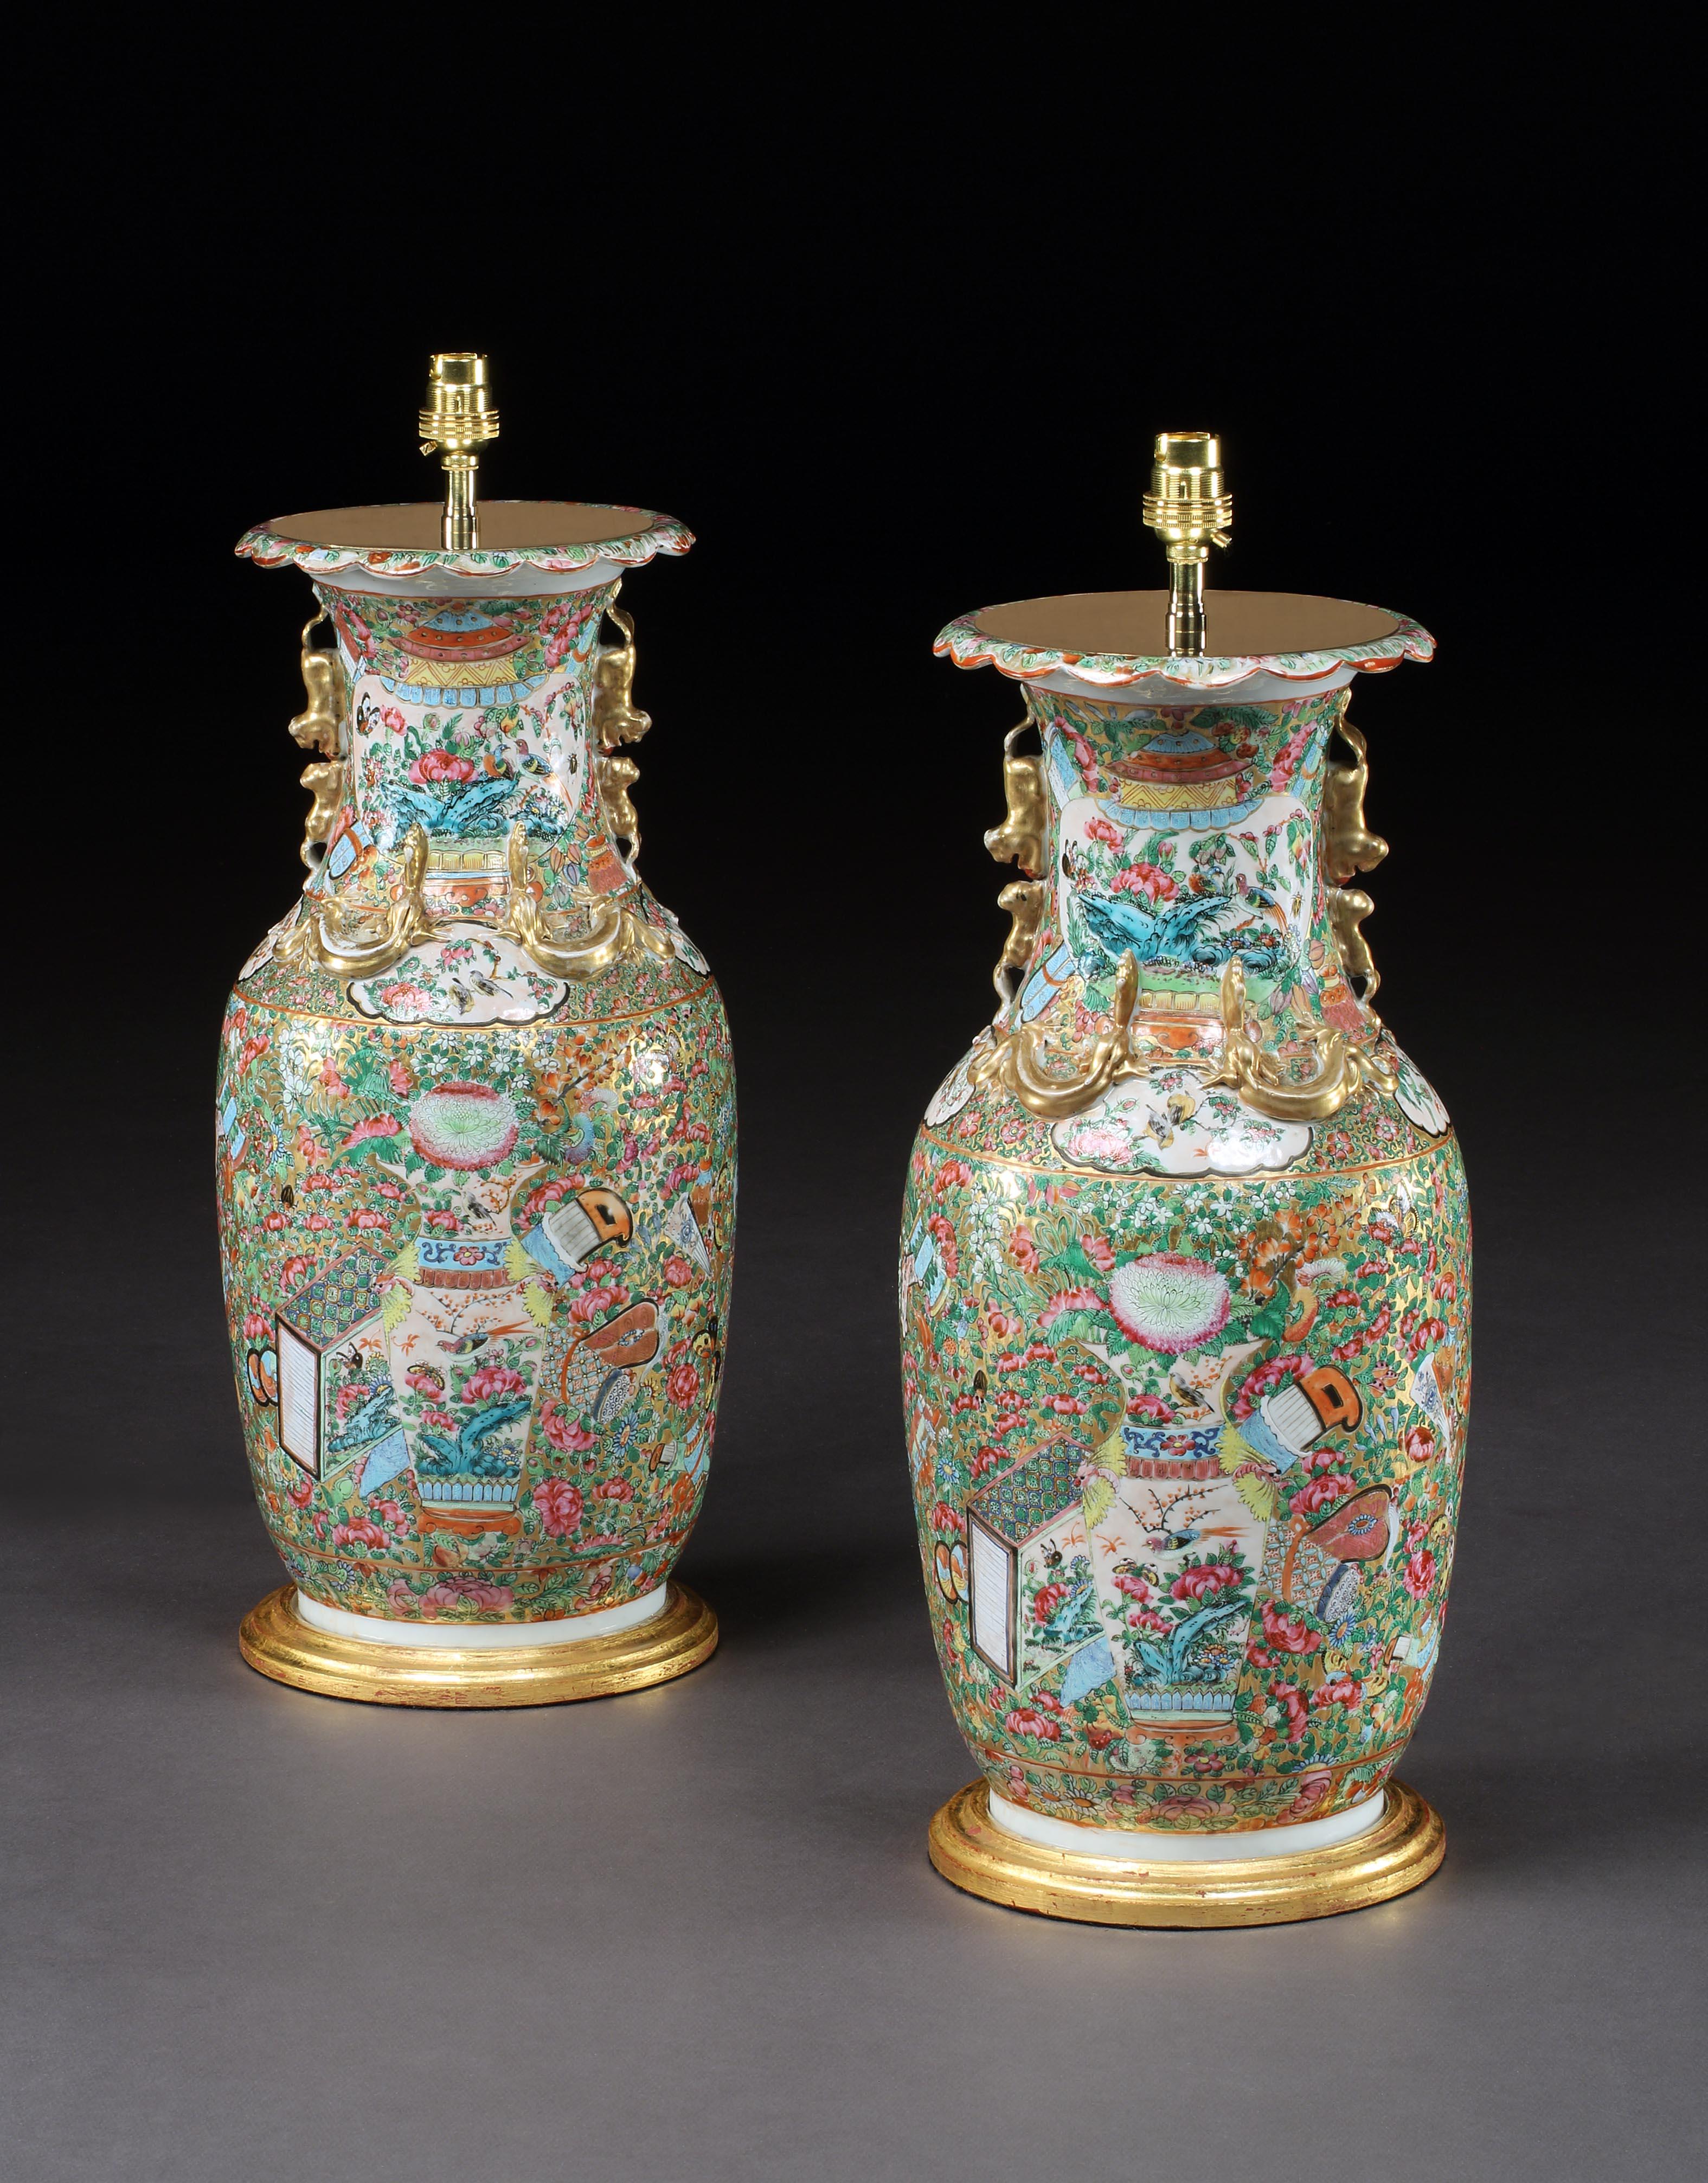 Pair of 19th Century Chinese Canton Baluster Porcelain Antique Table Lamps In Good Condition For Sale In London, GB